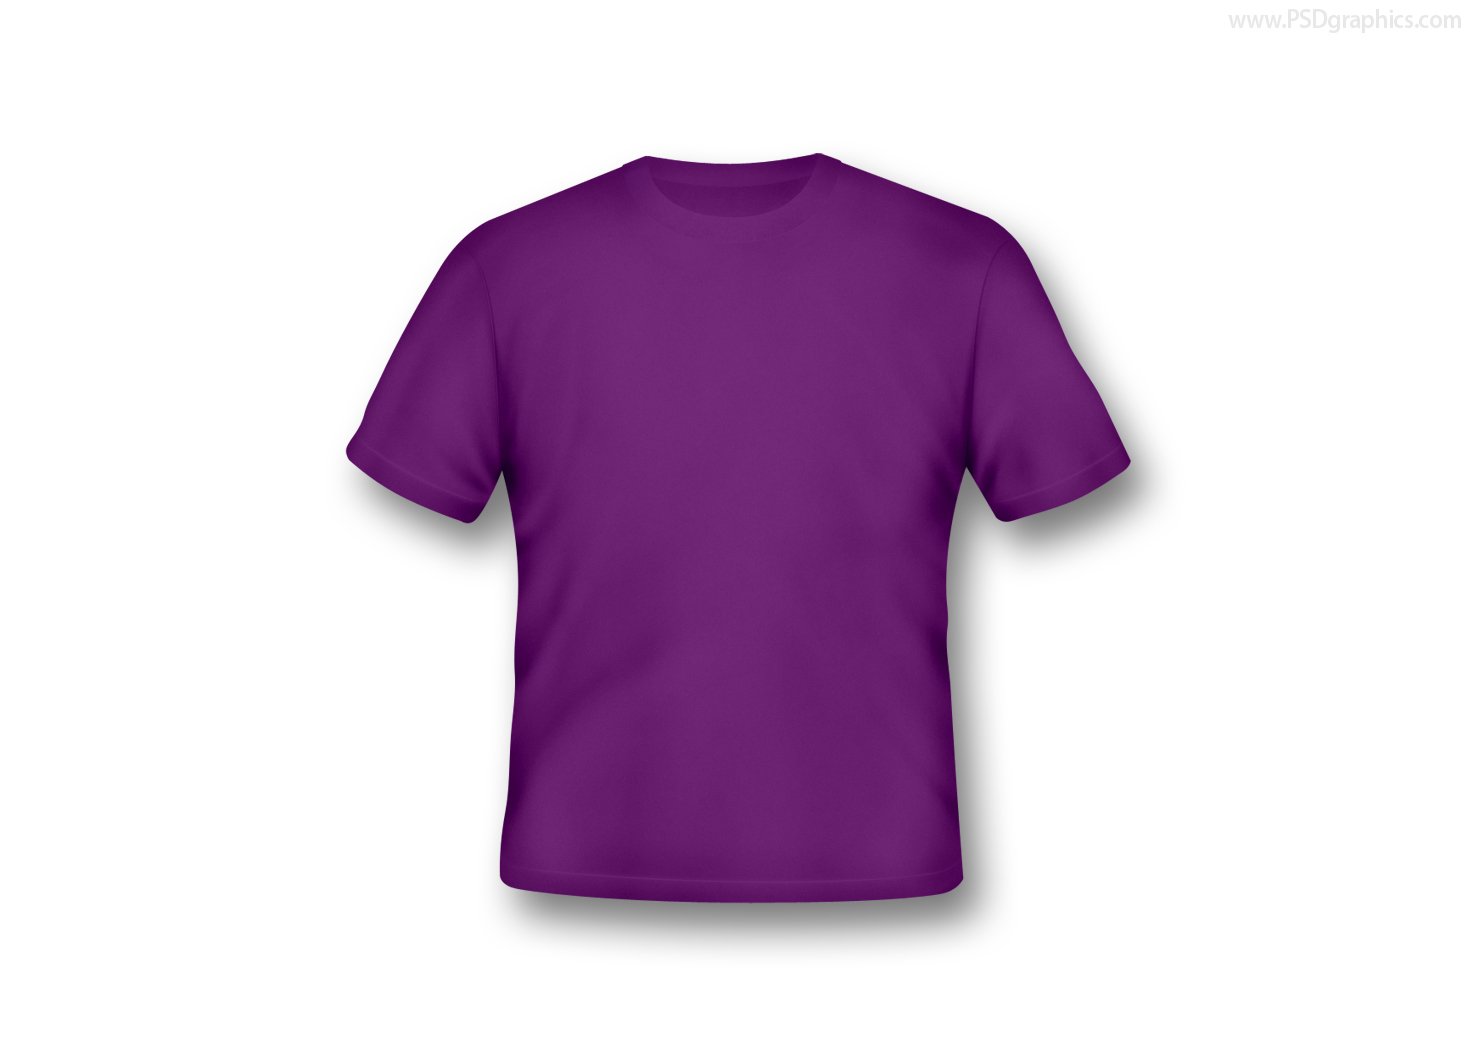 Blank tshirts in various colors PSDgraphics